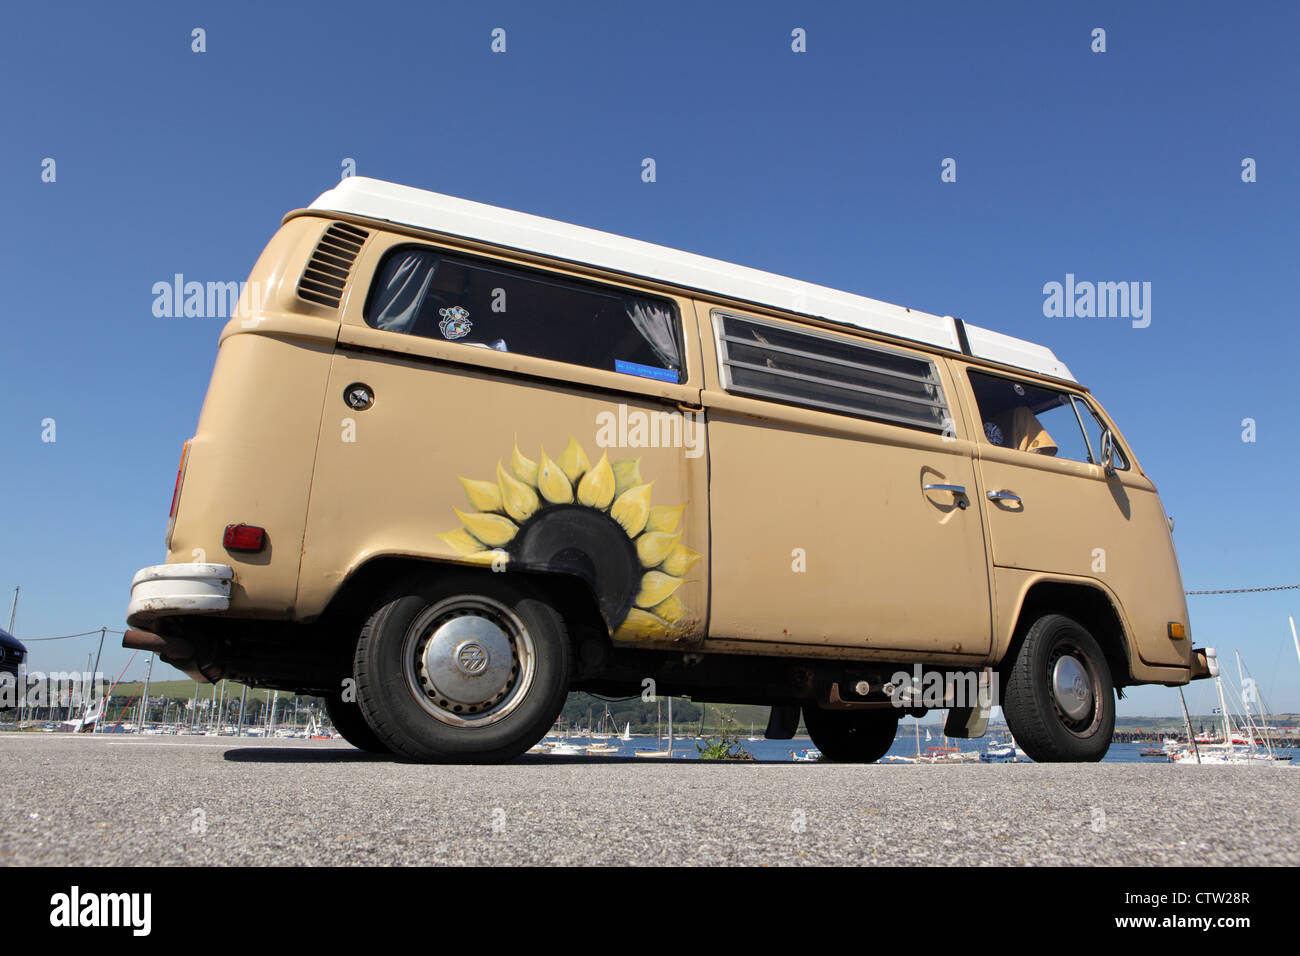 Beige Volkswagon VW camper van with sunflower painting on side parked on  quayside in Falmouth, Cornwall, UK Stock Photo - Alamy